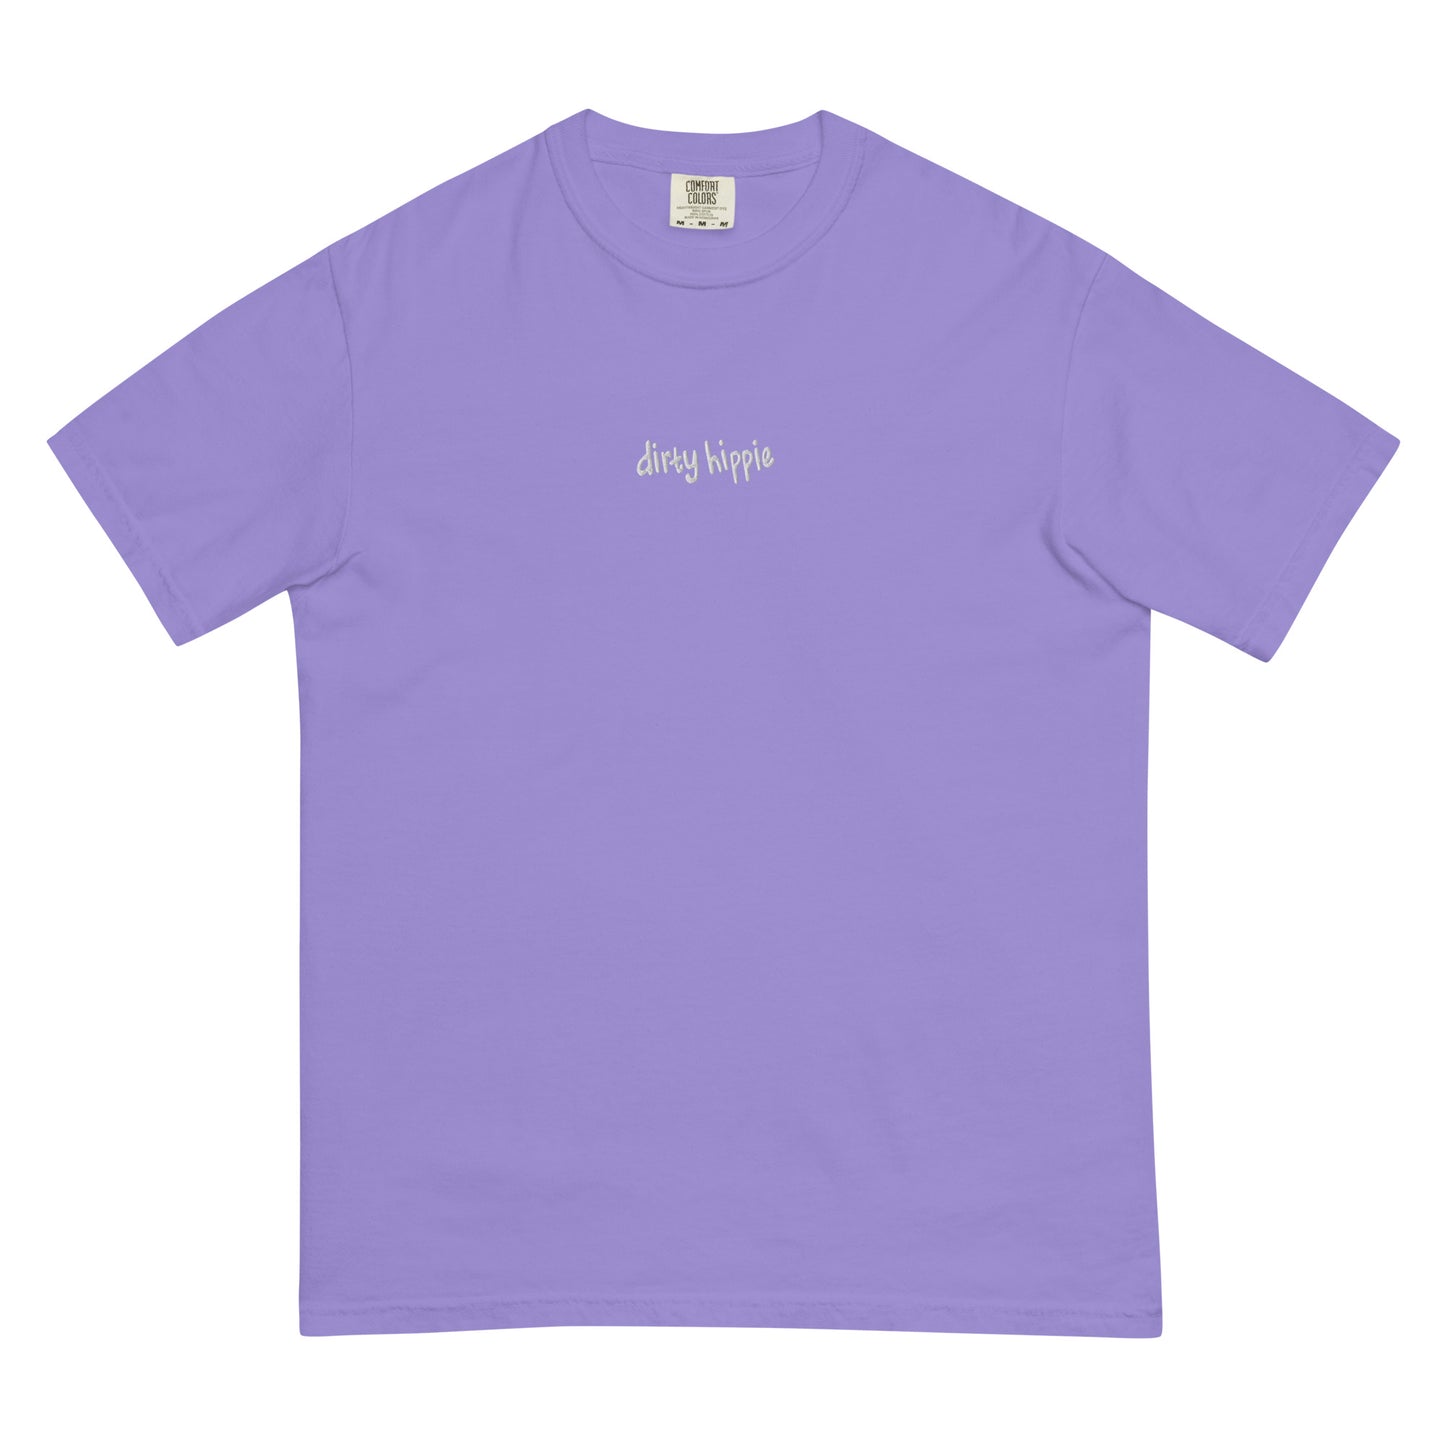 dirty hippie embroidered garment-dyed heavyweight t-shirt